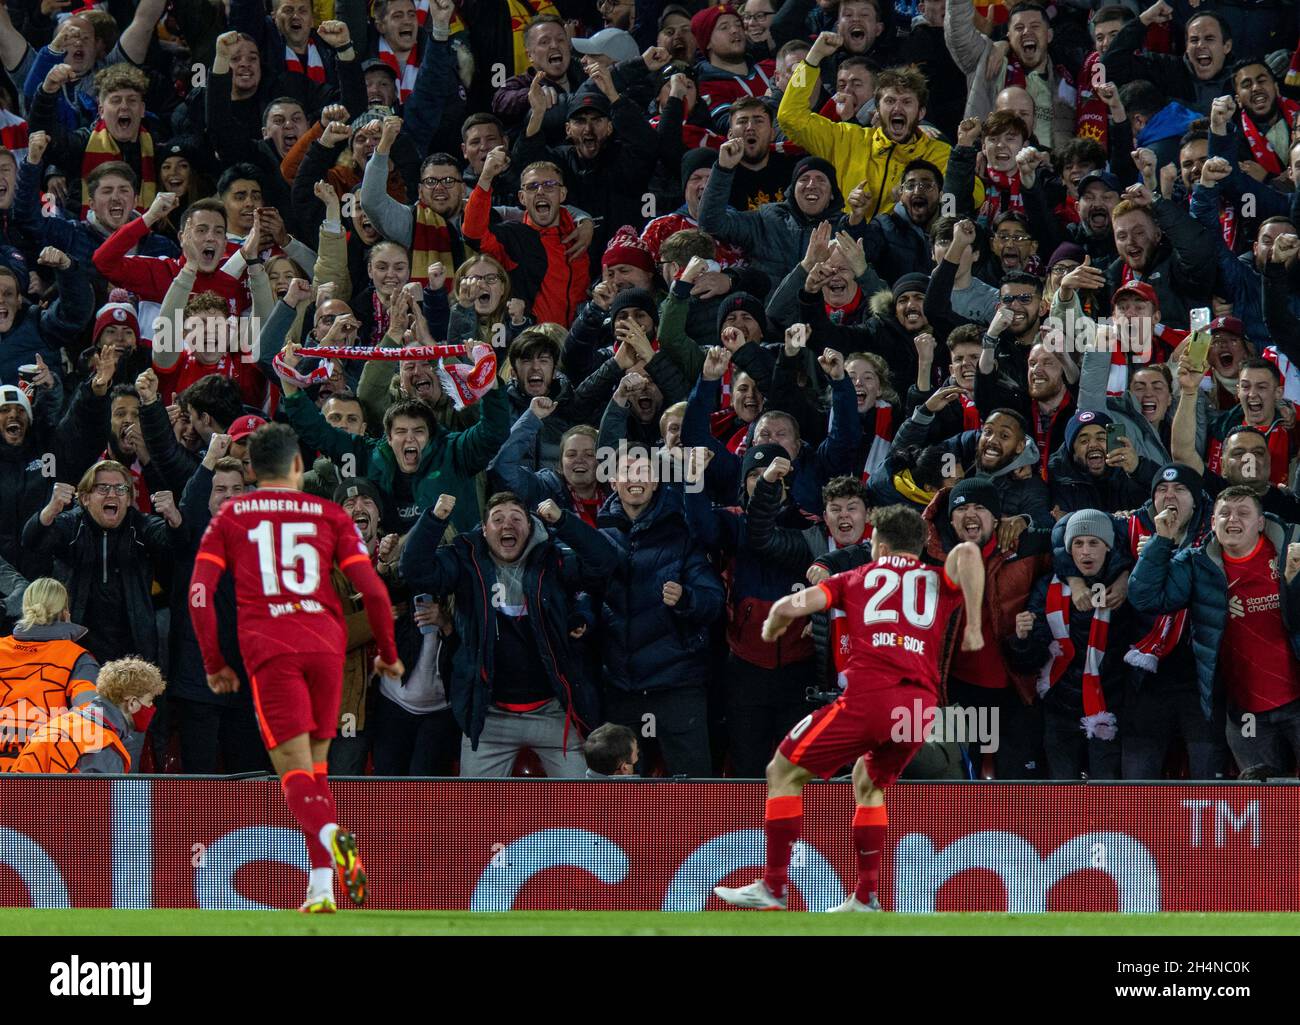 Liverpool. 3rd Nov, 2021. Liverpool's Diogo Jota (R) celebrates scoring  with fans during the UEFA Champions League Group B match between Liverpool  and Atletico Madrid in Liverpool, Britain, on Nov. 3, 2021.